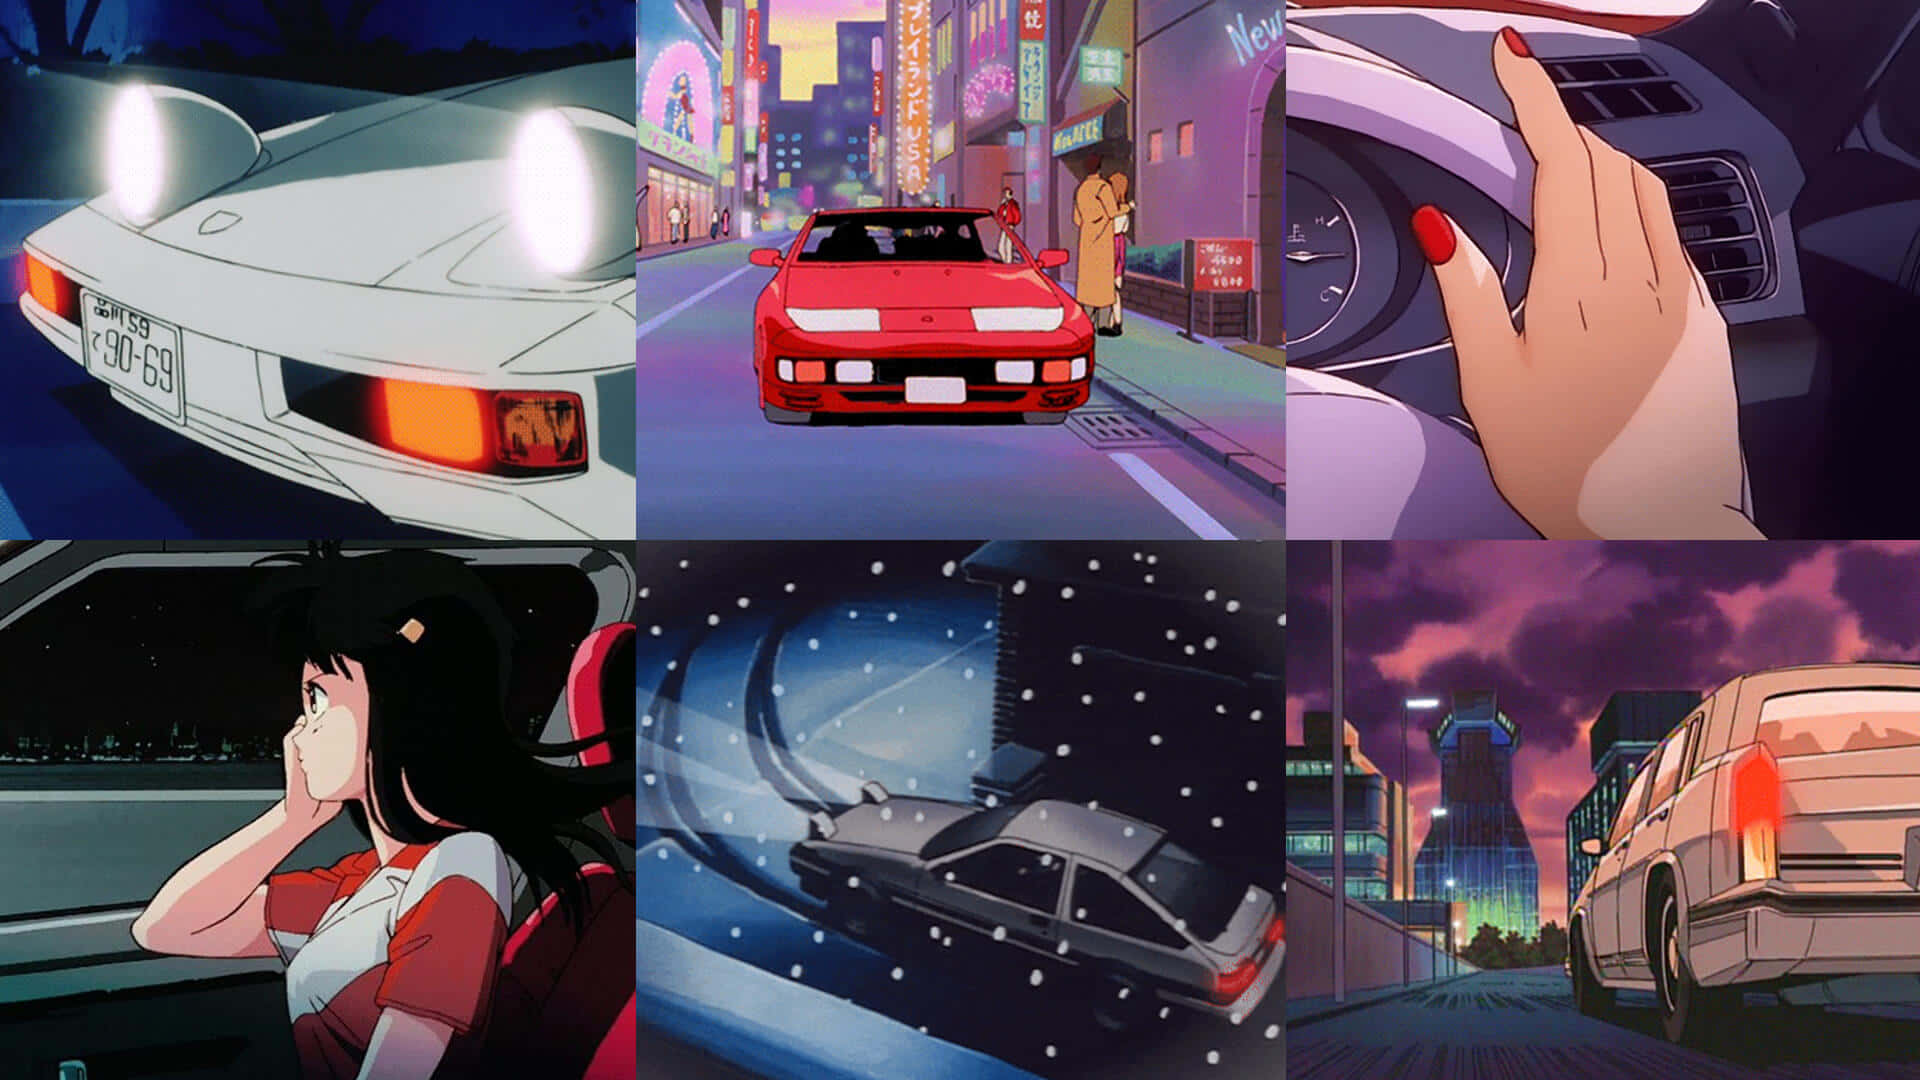 A Collage Of Anime Pictures With A Car And A Woman